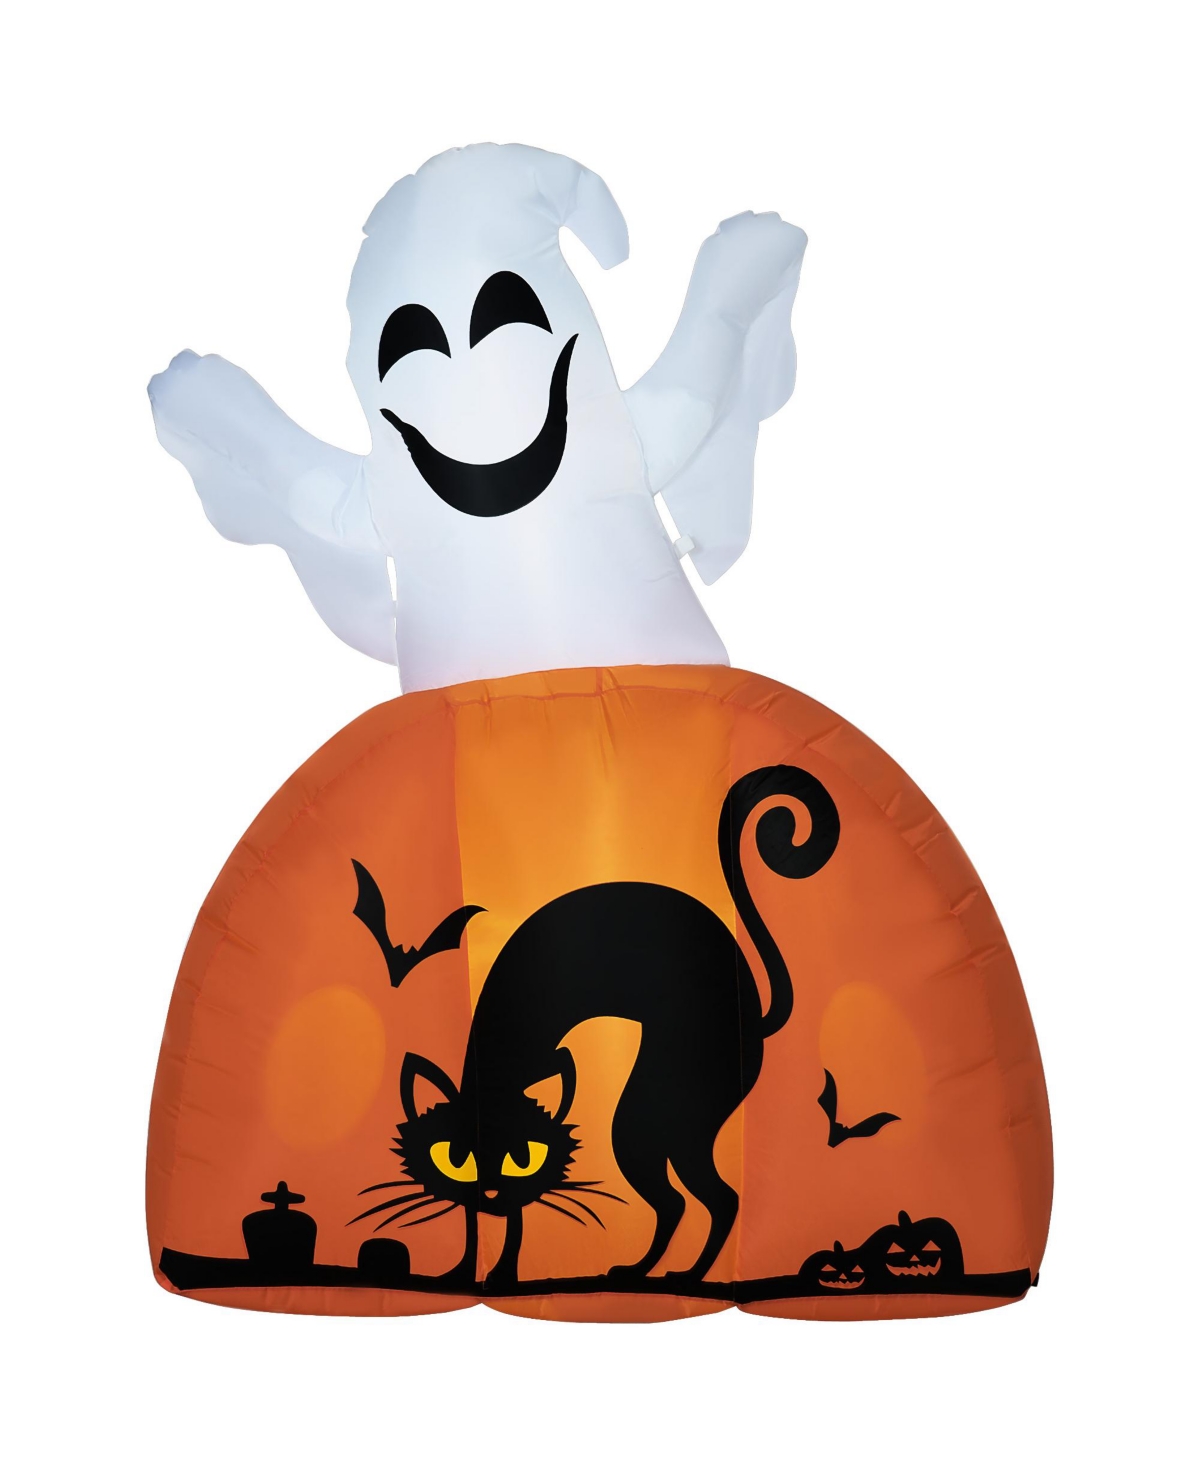 5ft Halloween Inflatable Ghost with Pumpkin Base and Led Lights - White